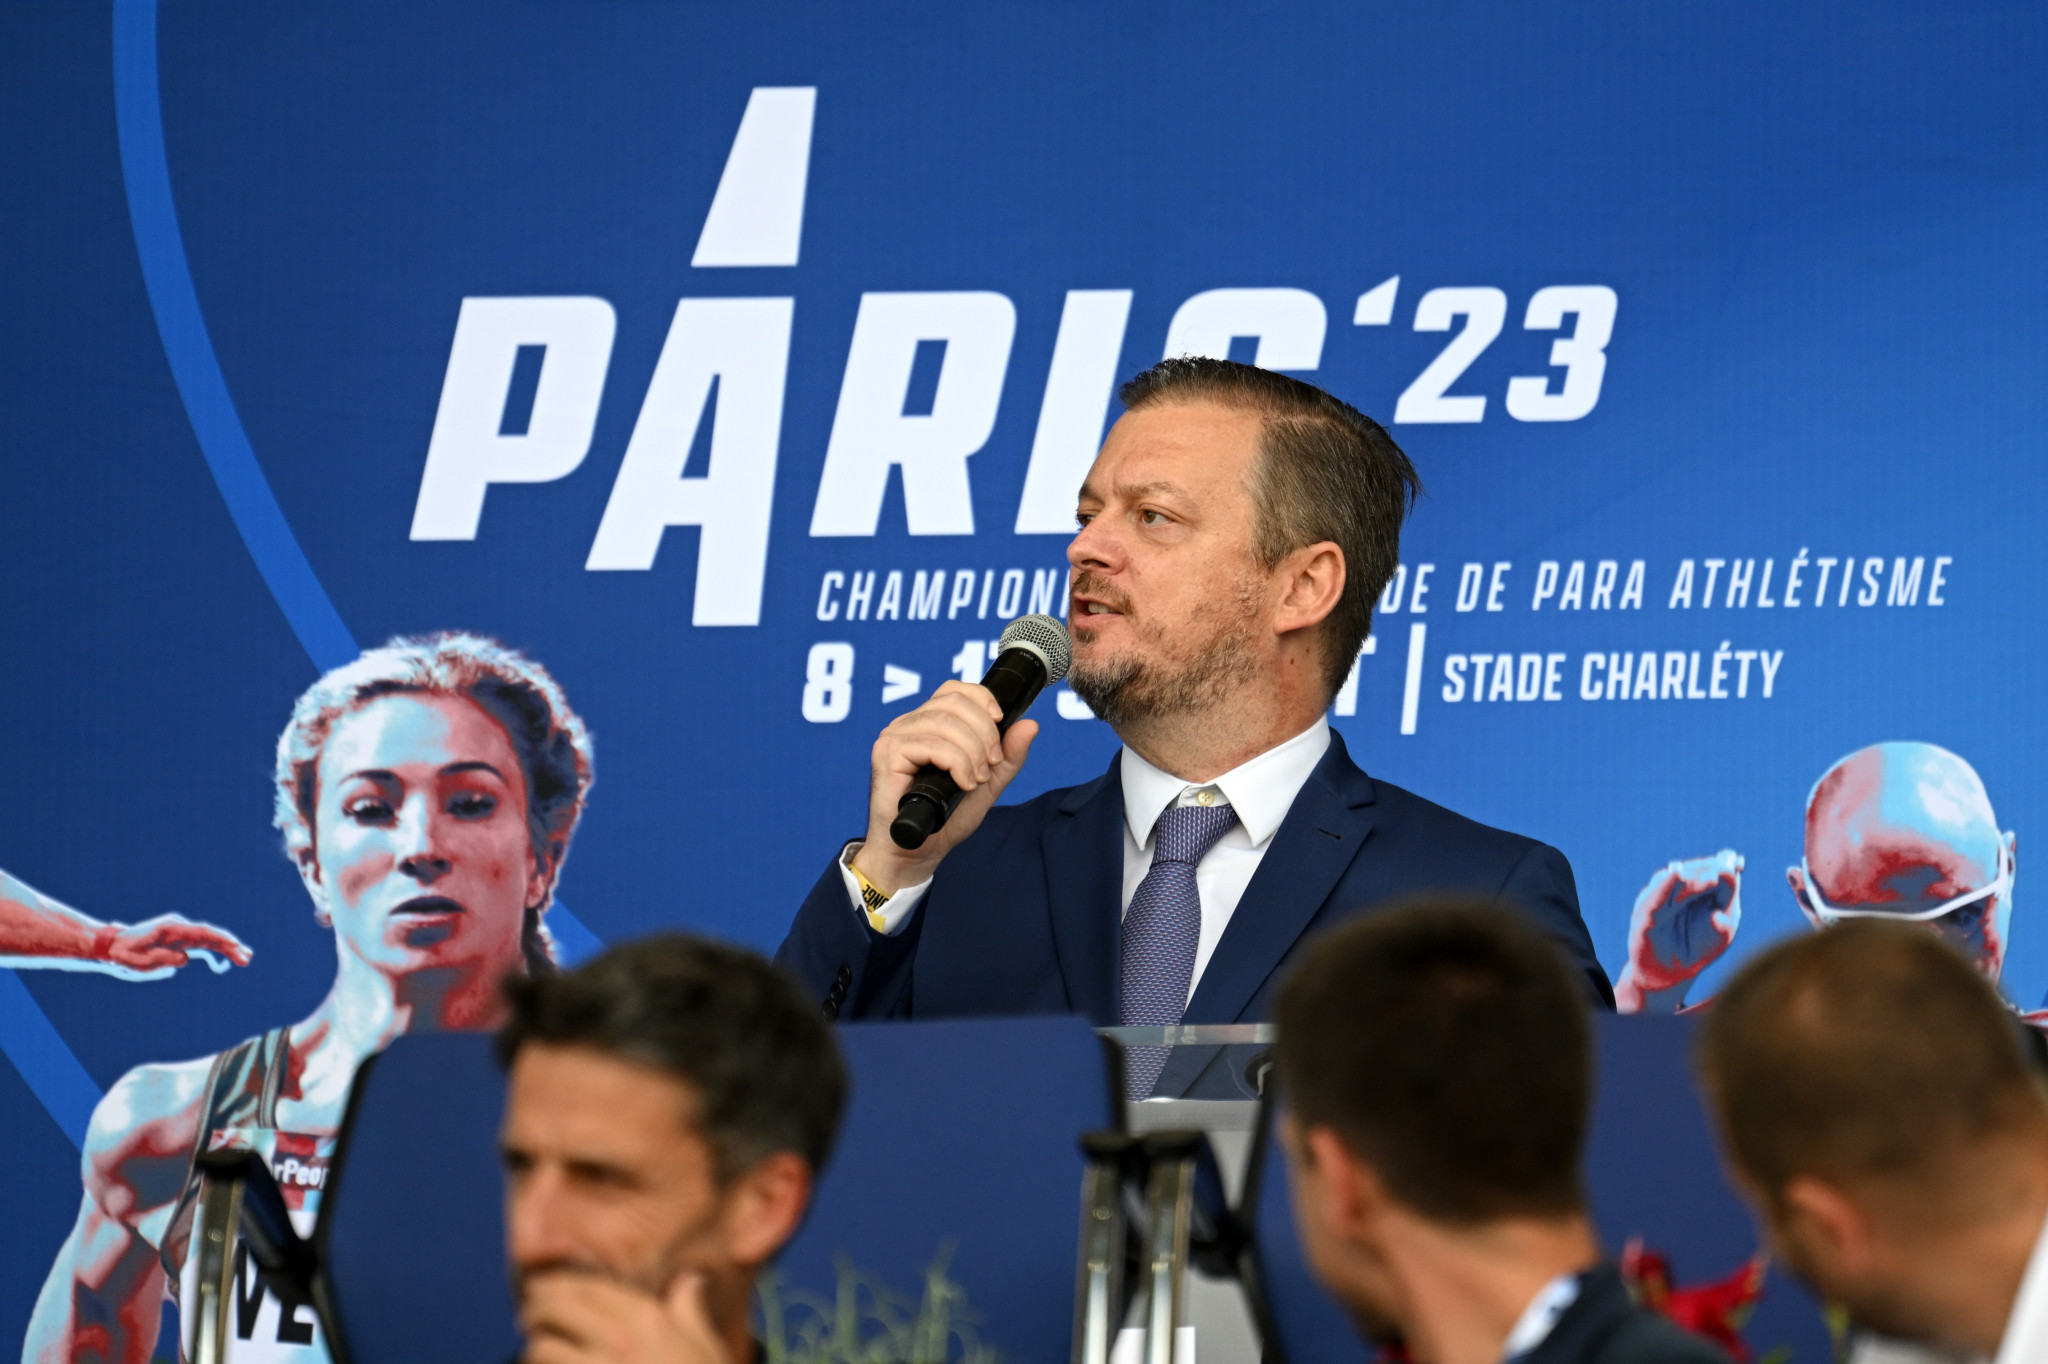 Andrew Parsons says he hopes the Paris 2024 Paralympics will 